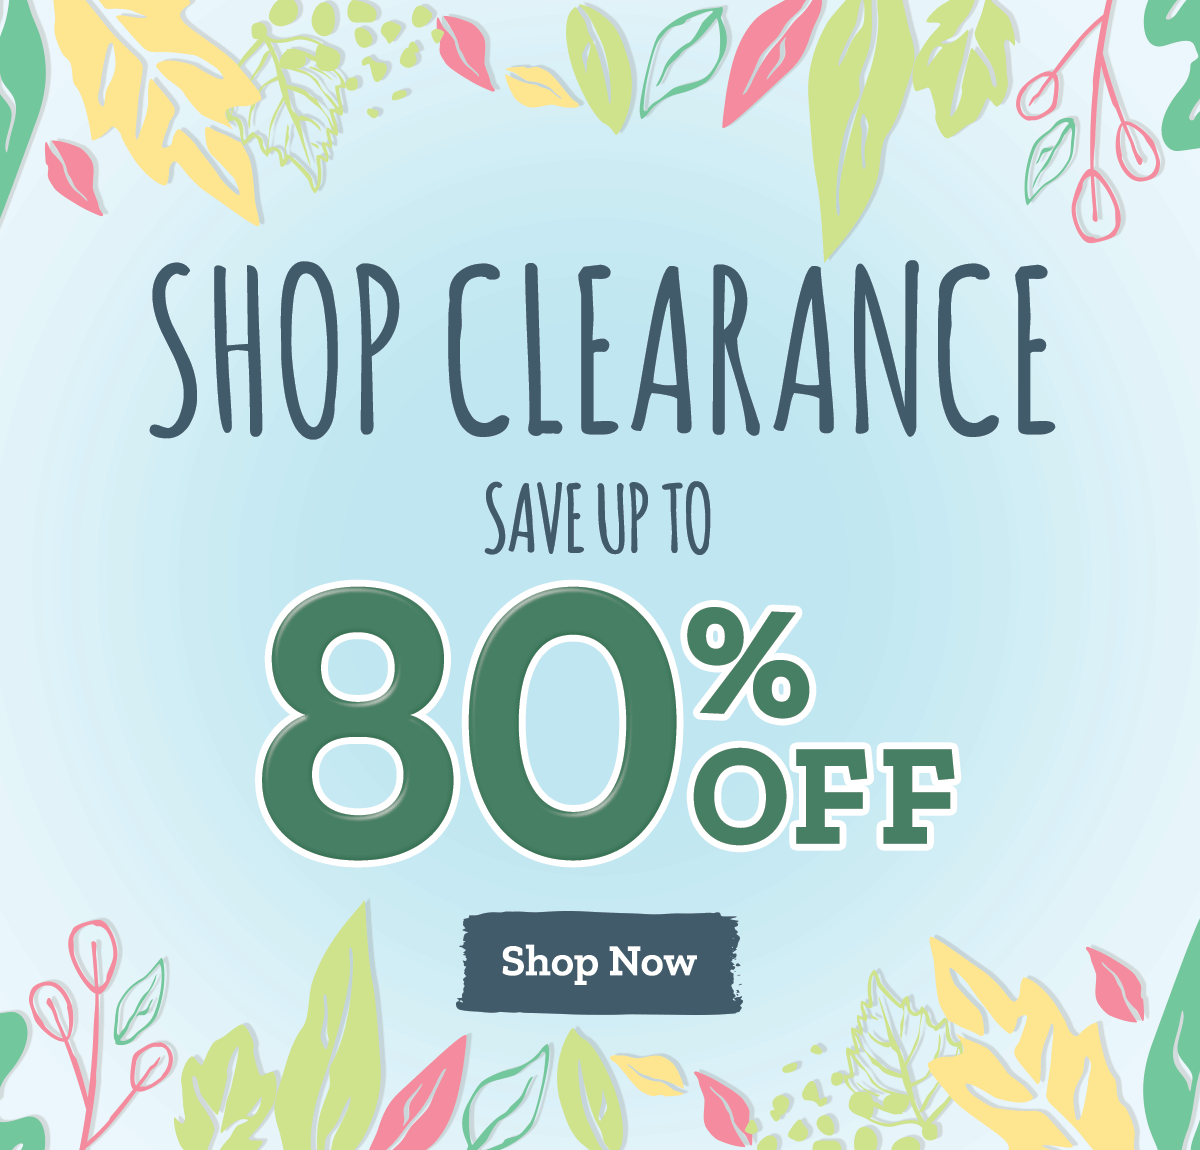 Save up to 80% - Shop Clearance